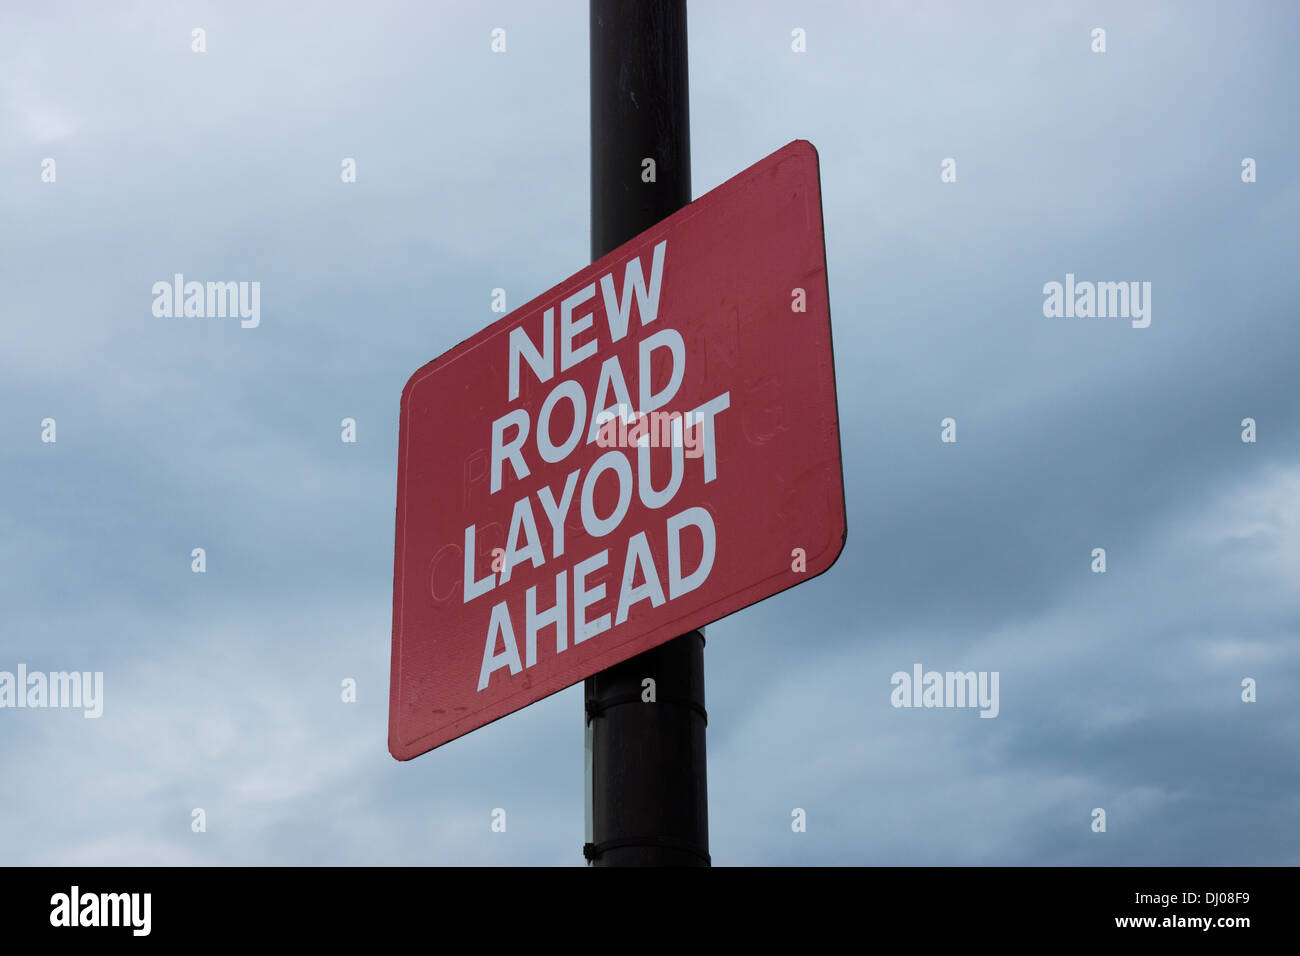 new road layout sign red white letters stormy sky Stock Photo